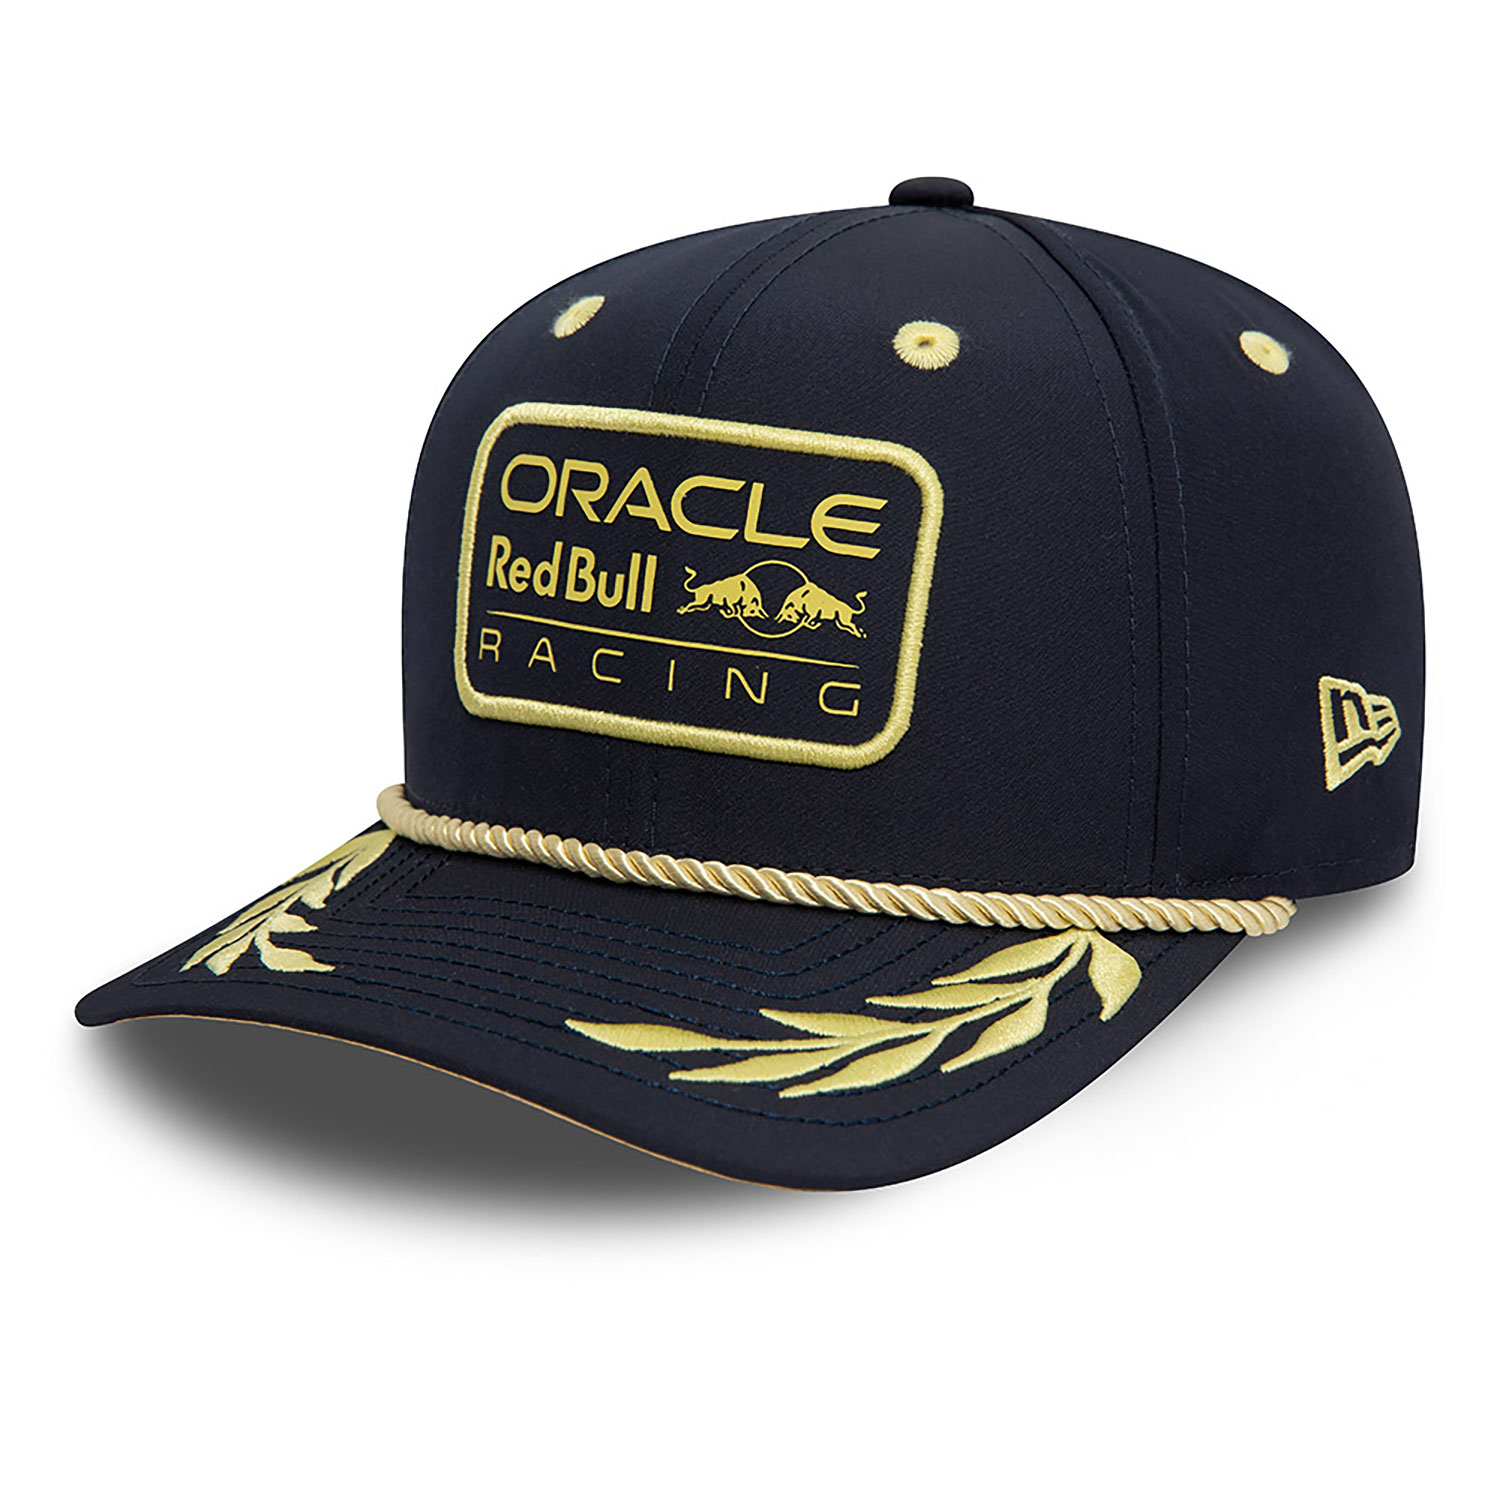 Casquette 9FIFTY Original Oracle Red Bull Racing F1 Champions